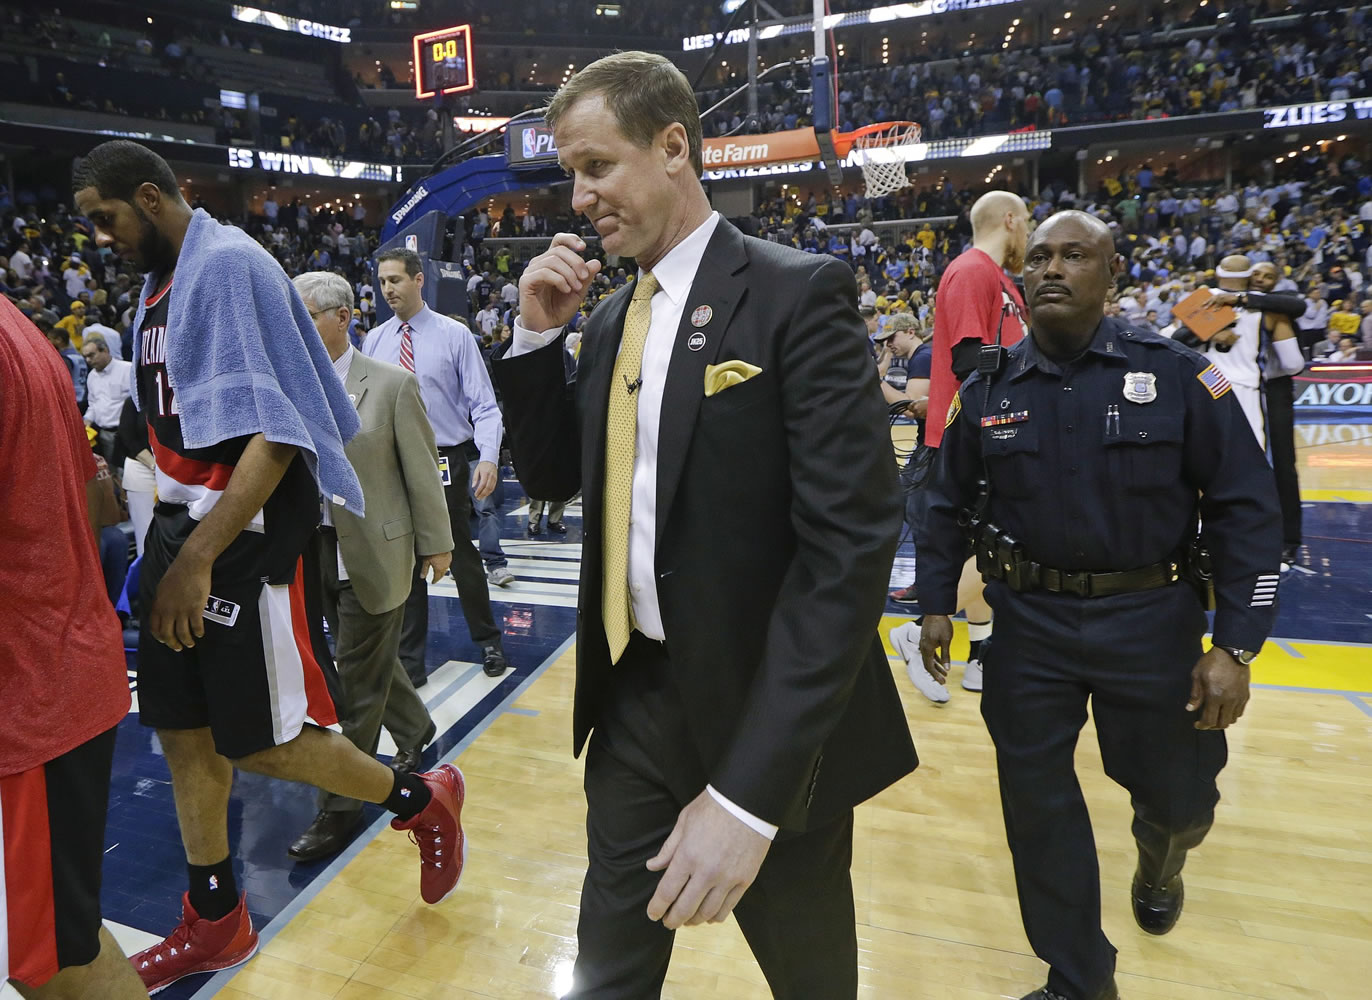 Portland Trail Blazers head coach Terry Stotts leaves the court with forward LaMarcus Aldridge, left, after losing to the Memphis Grizzlies in Game 5 of an NBA basketball Western Conference playoff series Wednesday, April 29, 2015, in Memphis, Tenn. The Grizzlies won 99-93 to win the series 4-1.